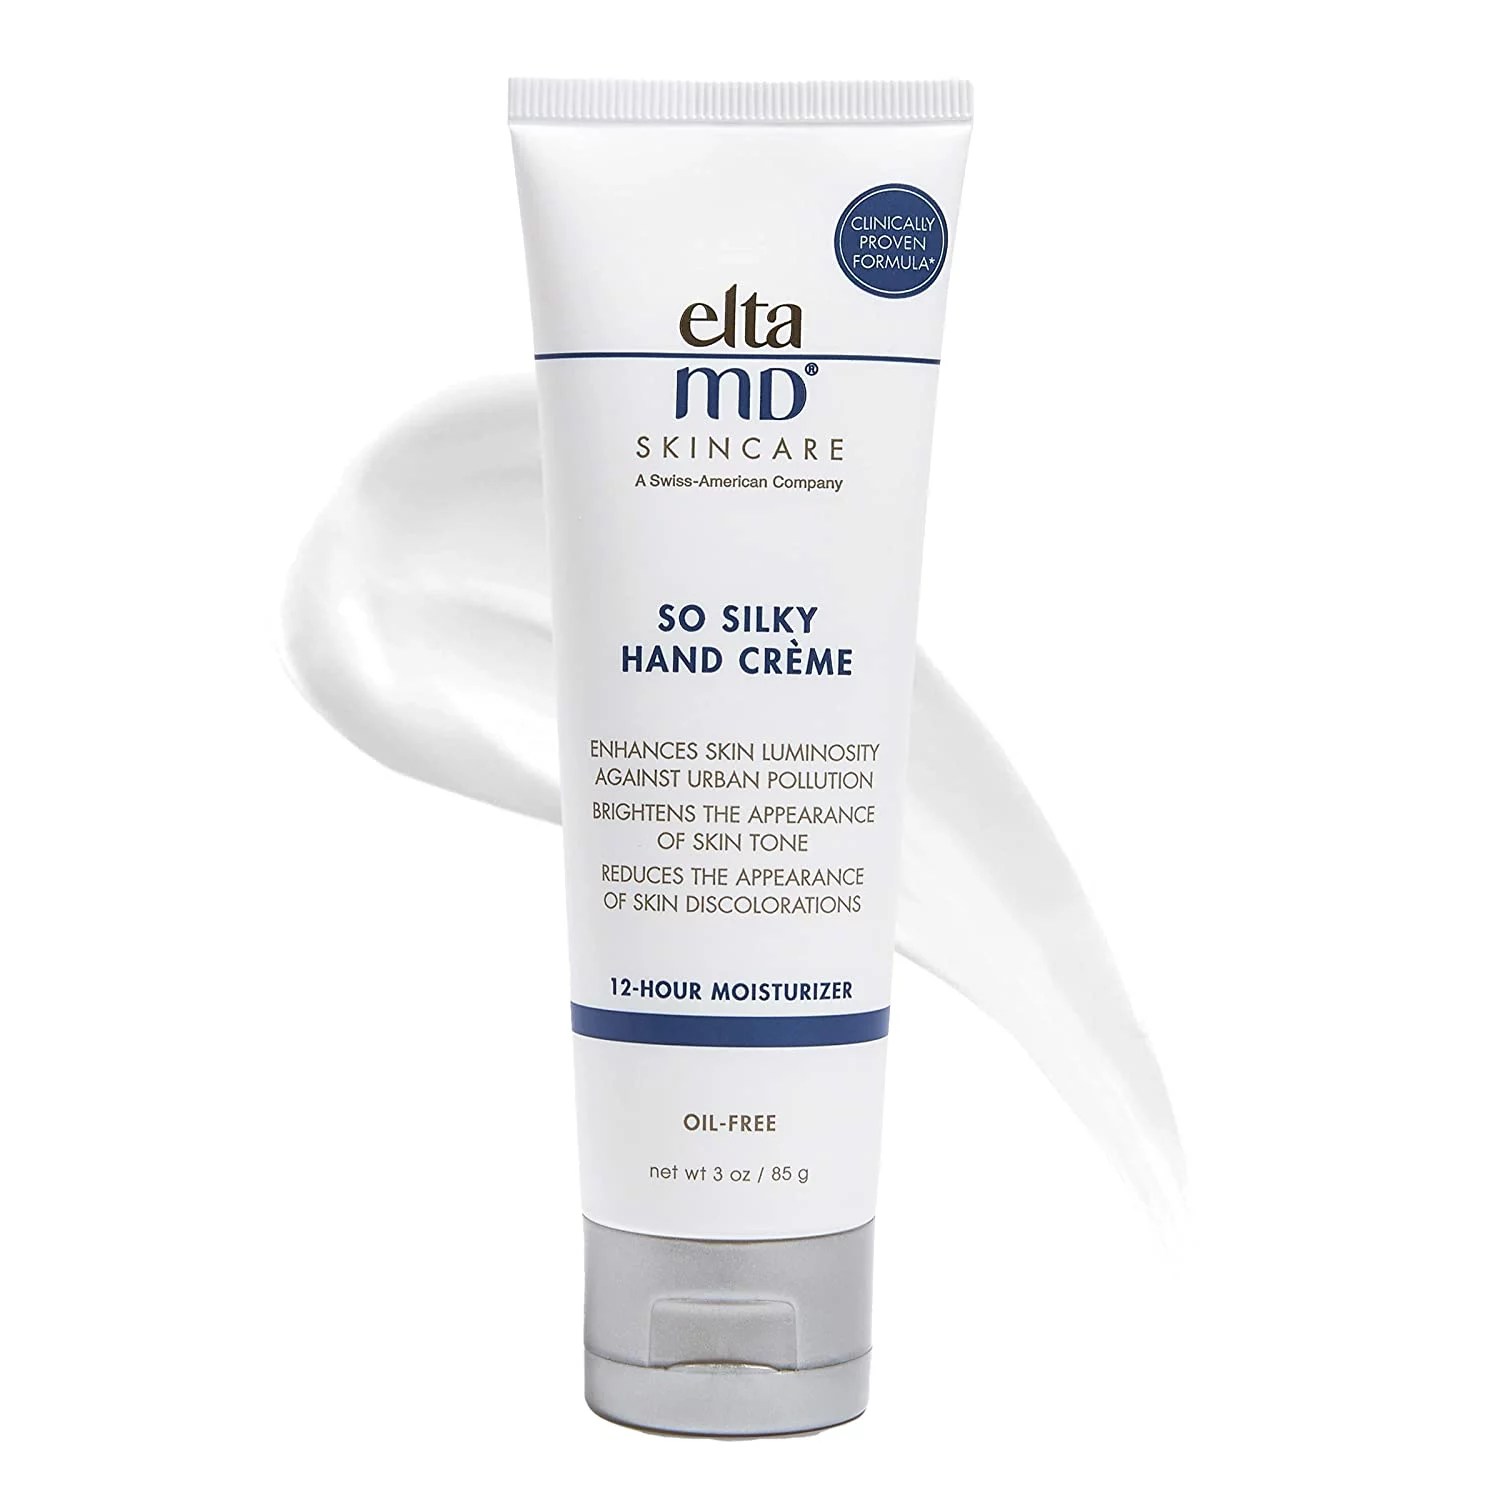 elta MD so silky hand cream tube with product swatch behind it